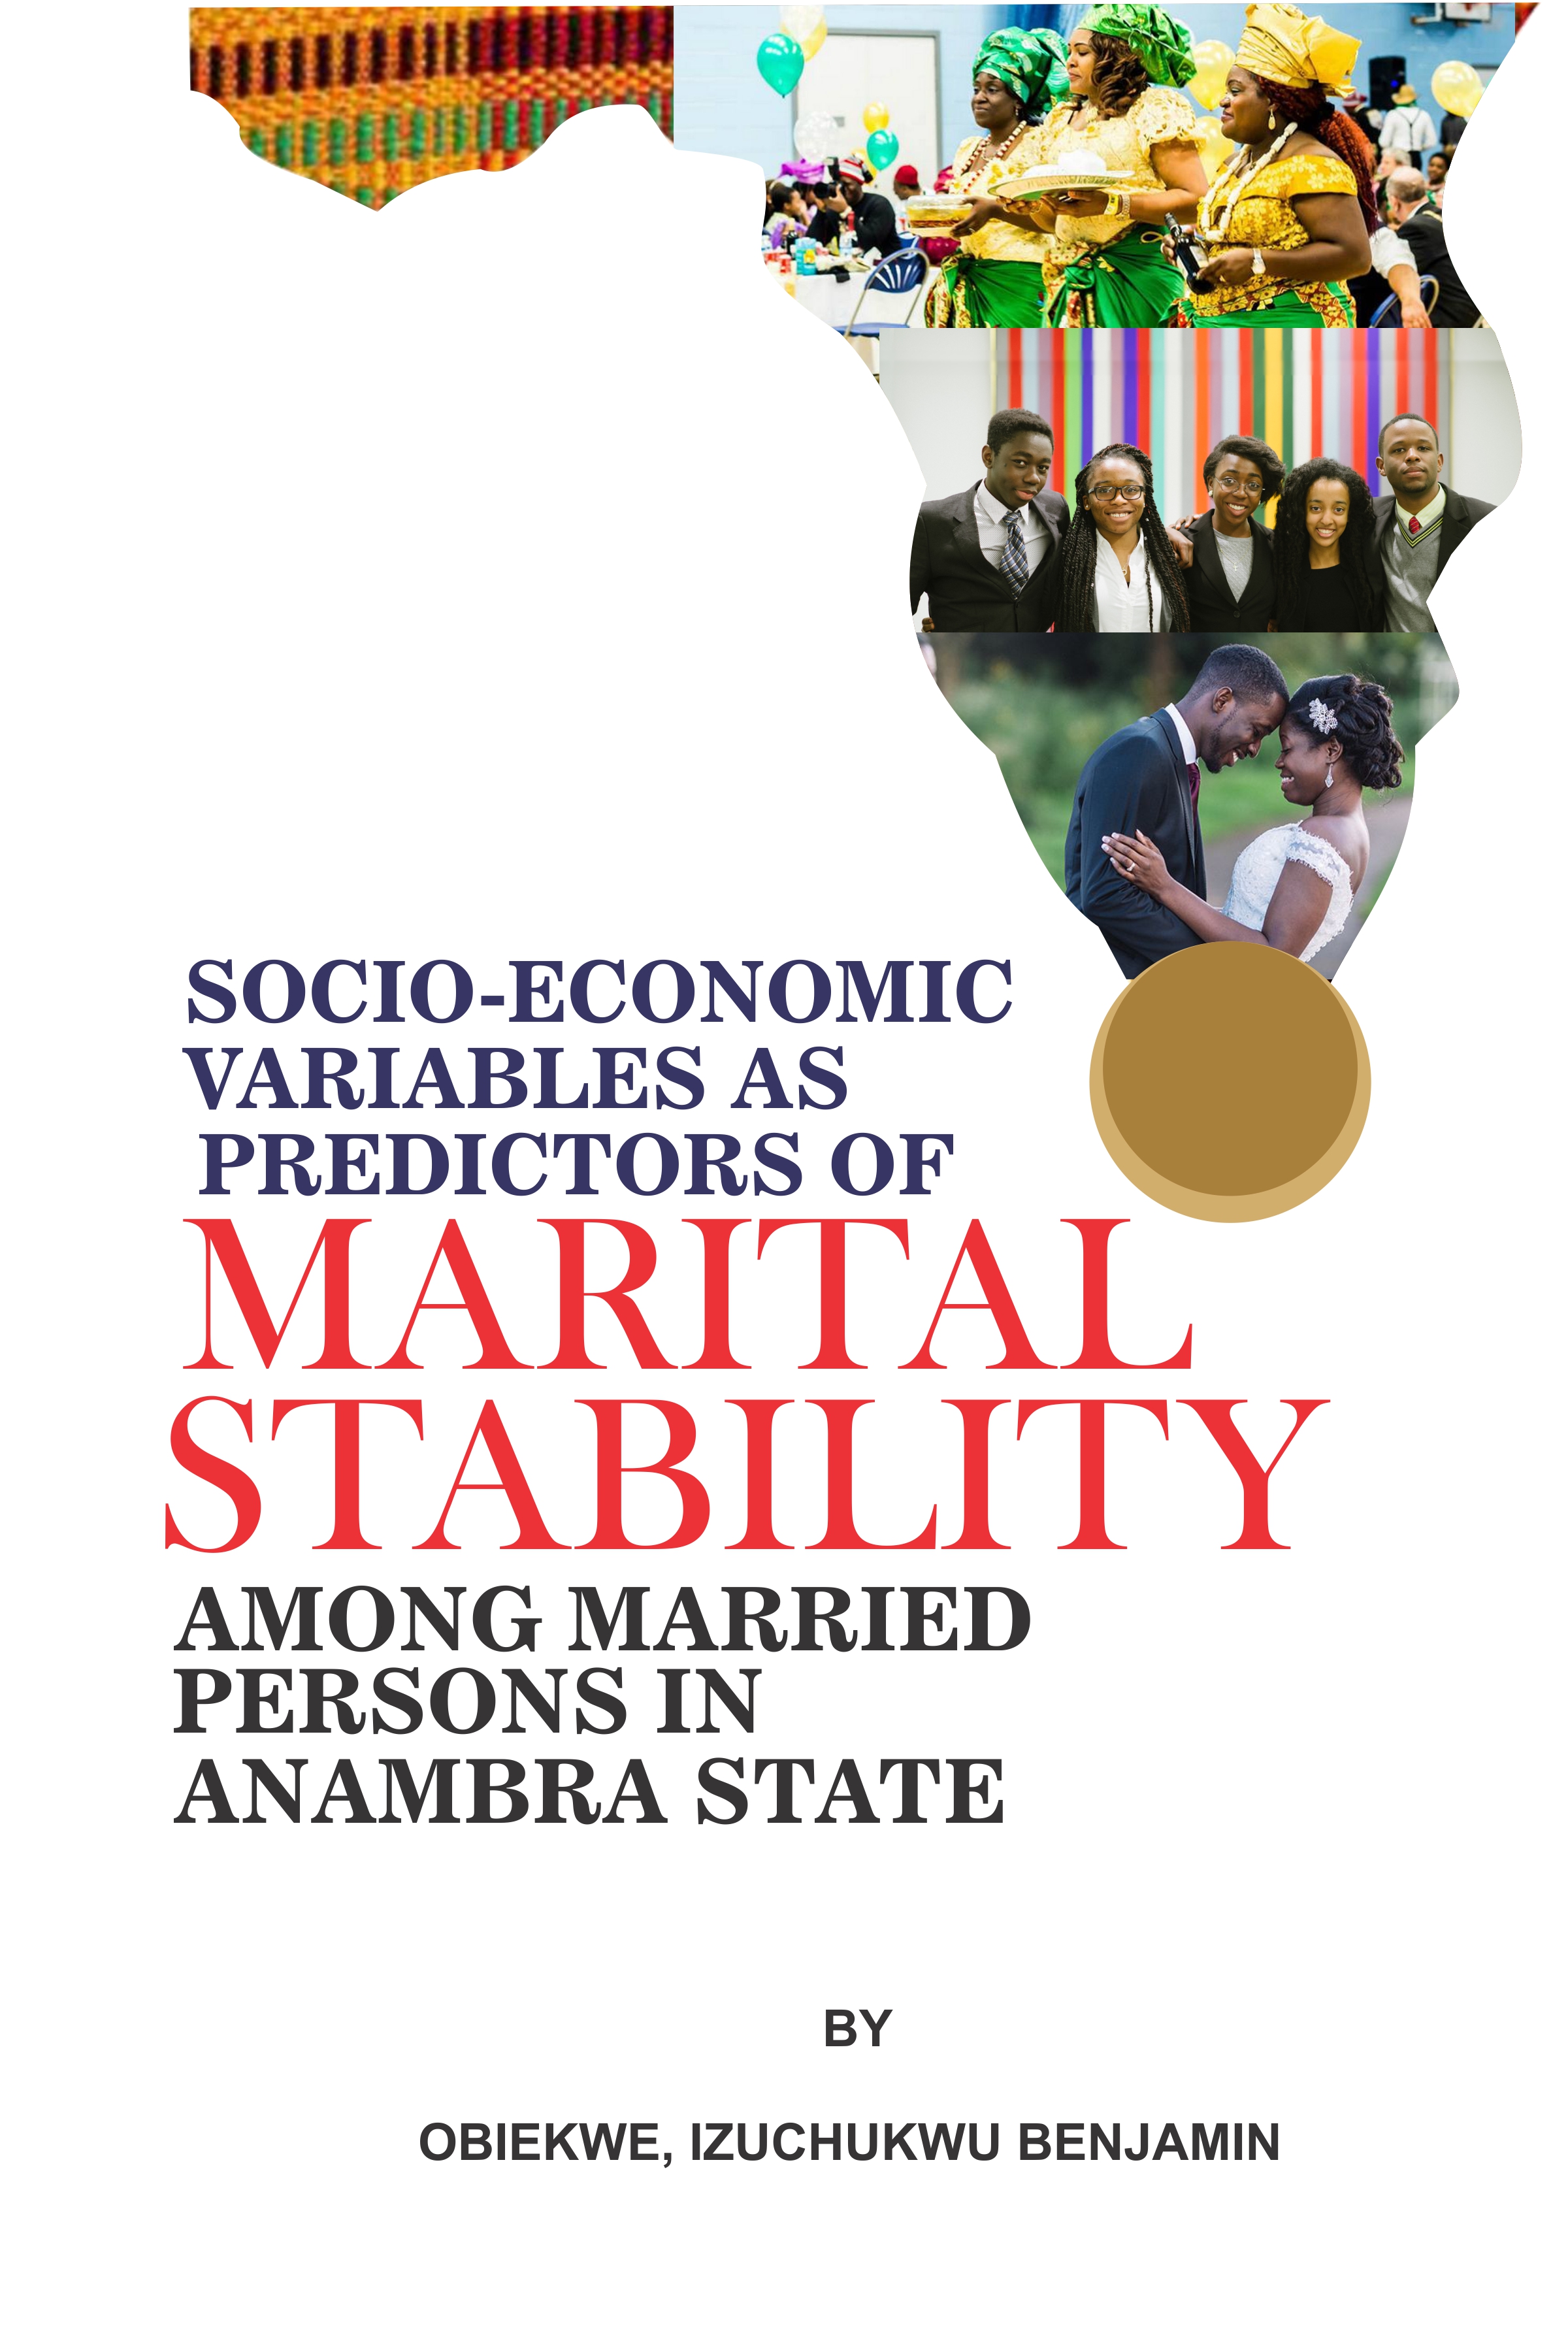 Socio-Economic-Variables-as-Predictors-of-Marital-Stability-Among-Married-Persons-in-Anambra-State